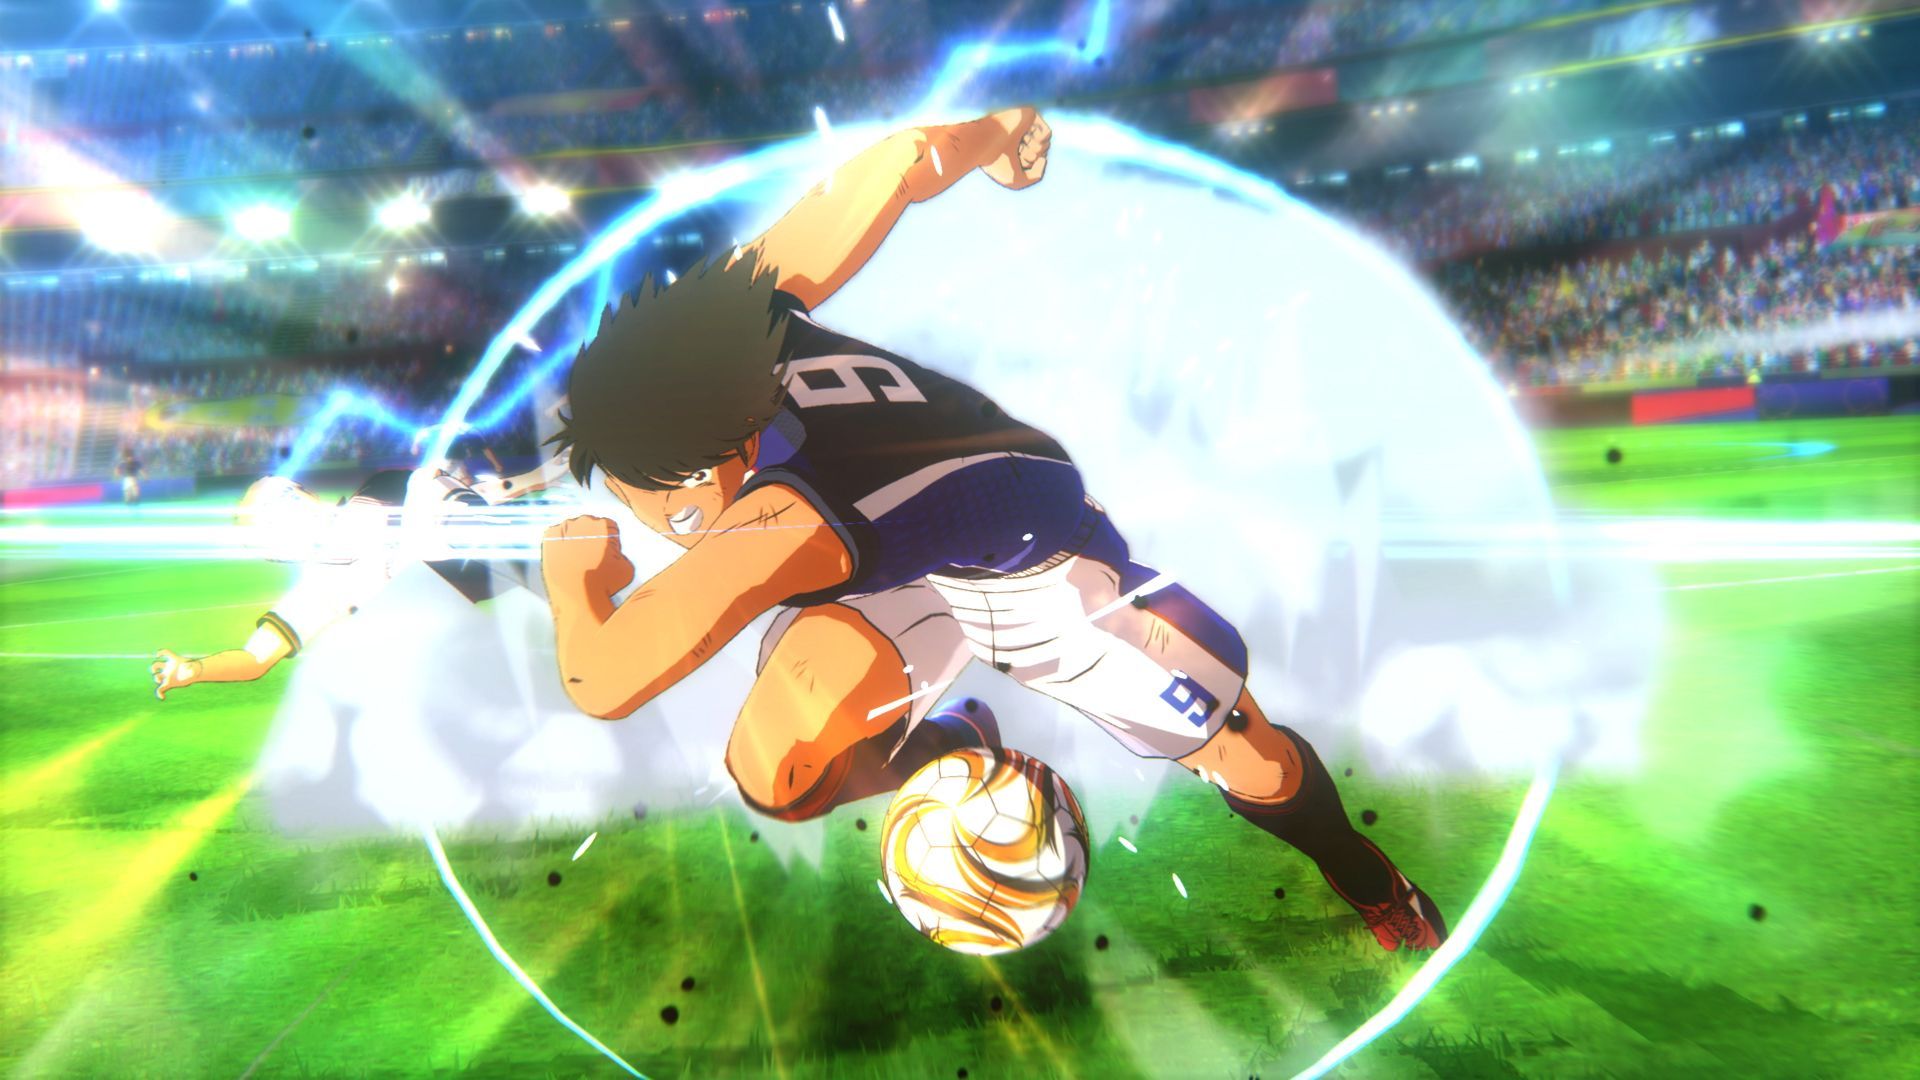 Captain Tsubasa Rise of New Champions will bet on the most arcade